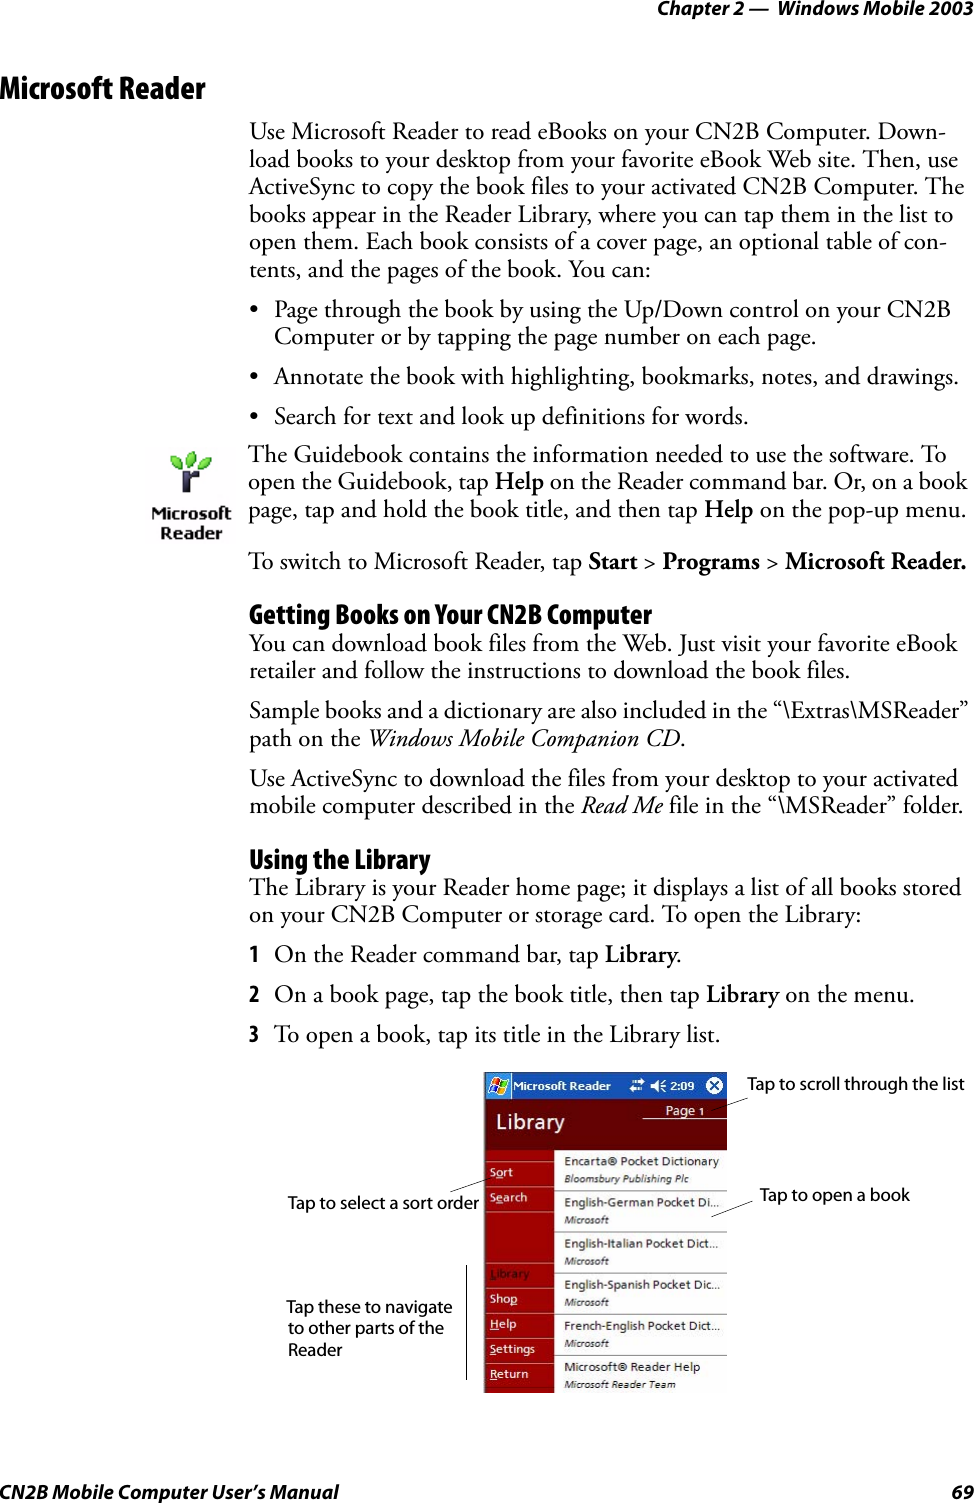 Chapter 2 —  Windows Mobile 2003CN2B Mobile Computer User’s Manual 69Microsoft ReaderUse Microsoft Reader to read eBooks on your CN2B Computer. Down-load books to your desktop from your favorite eBook Web site. Then, use ActiveSync to copy the book files to your activated CN2B Computer. The books appear in the Reader Library, where you can tap them in the list to open them. Each book consists of a cover page, an optional table of con-tents, and the pages of the book. You can:• Page through the book by using the Up/Down control on your CN2B Computer or by tapping the page number on each page.• Annotate the book with highlighting, bookmarks, notes, and drawings.• Search for text and look up definitions for words. Getting Books on Your CN2B ComputerYou can download book files from the Web. Just visit your favorite eBook retailer and follow the instructions to download the book files.Sample books and a dictionary are also included in the “\Extras\MSReader” path on the Windows Mobile Companion CD.Use ActiveSync to download the files from your desktop to your activated mobile computer described in the Read Me file in the “\MSReader” folder.Using the LibraryThe Library is your Reader home page; it displays a list of all books stored on your CN2B Computer or storage card. To open the Library:1On the Reader command bar, tap Library.2On a book page, tap the book title, then tap Library on the menu.3To open a book, tap its title in the Library list.The Guidebook contains the information needed to use the software. To open the Guidebook, tap Help on the Reader command bar. Or, on a book page, tap and hold the book title, and then tap Help on the pop-up menu.To switch to Microsoft Reader, tap Start &gt; Programs &gt; Microsoft Reader.Tap these to navigateTap to scroll through the listTap to open a bookTap to select a sort orderto other parts of theReader